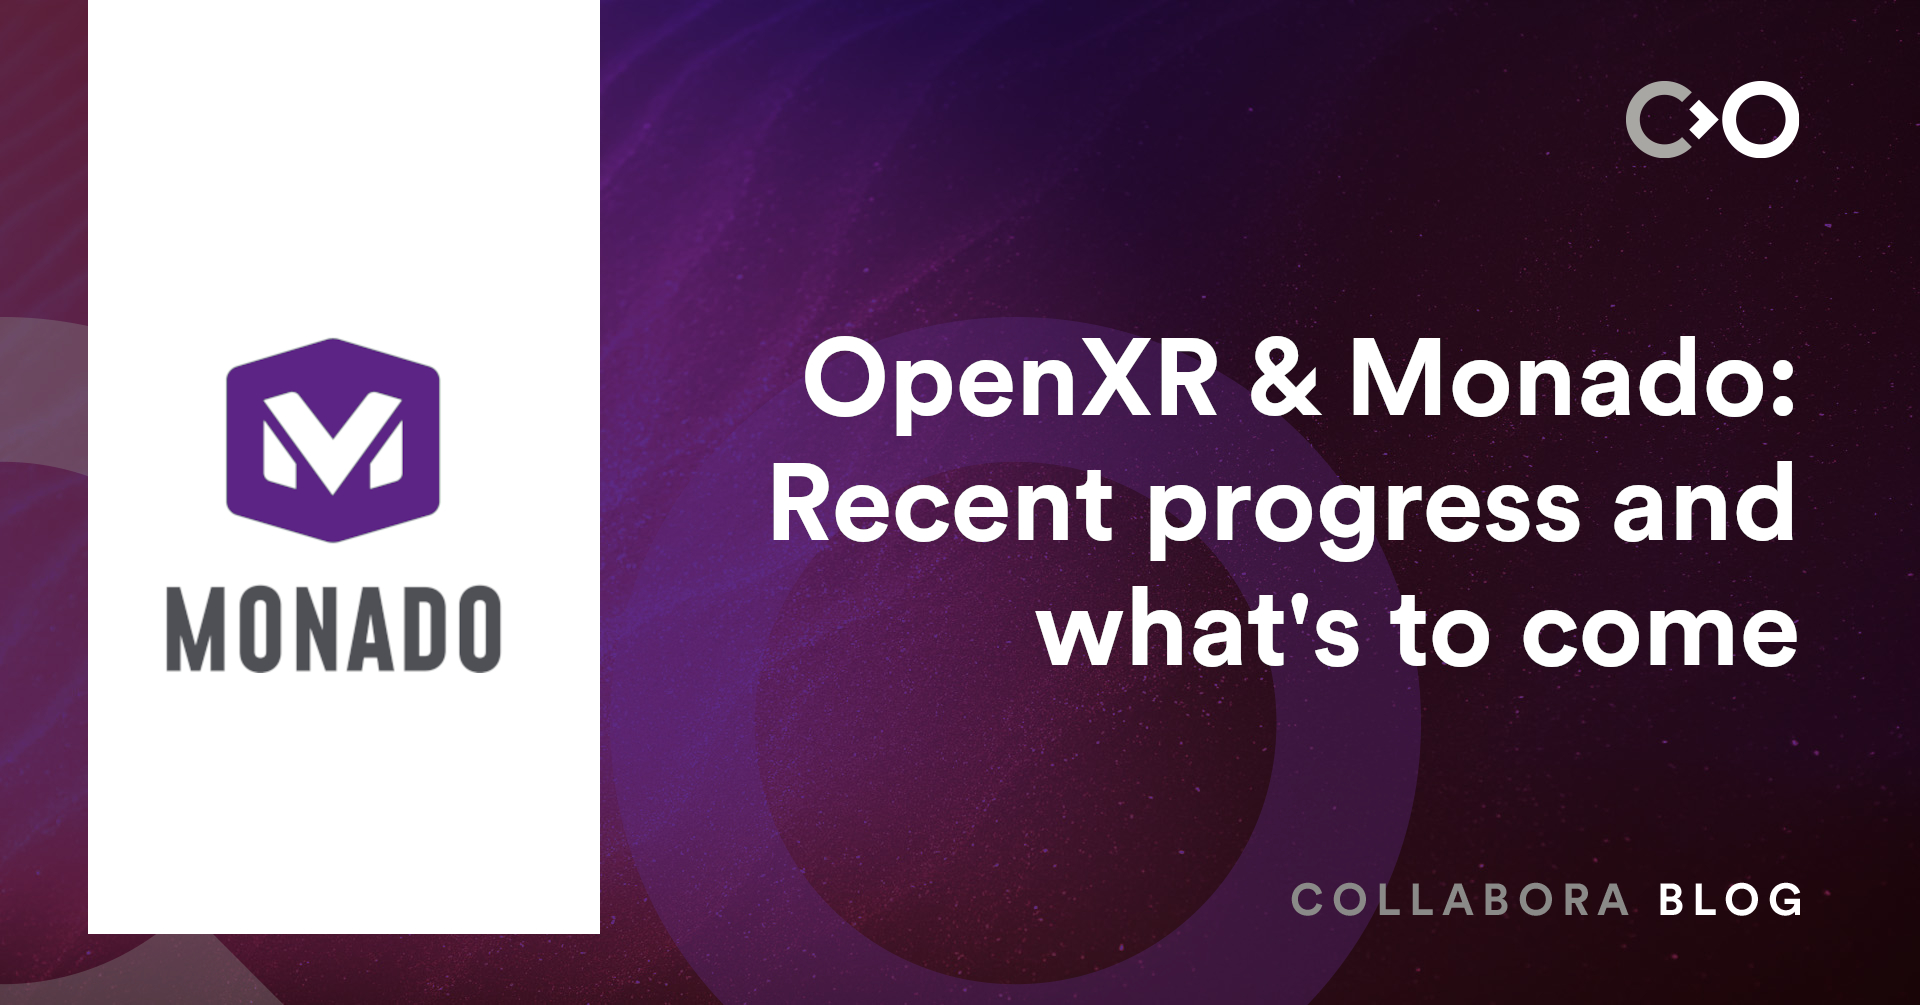 OpenXR & Monado: Recent progress and what's to come